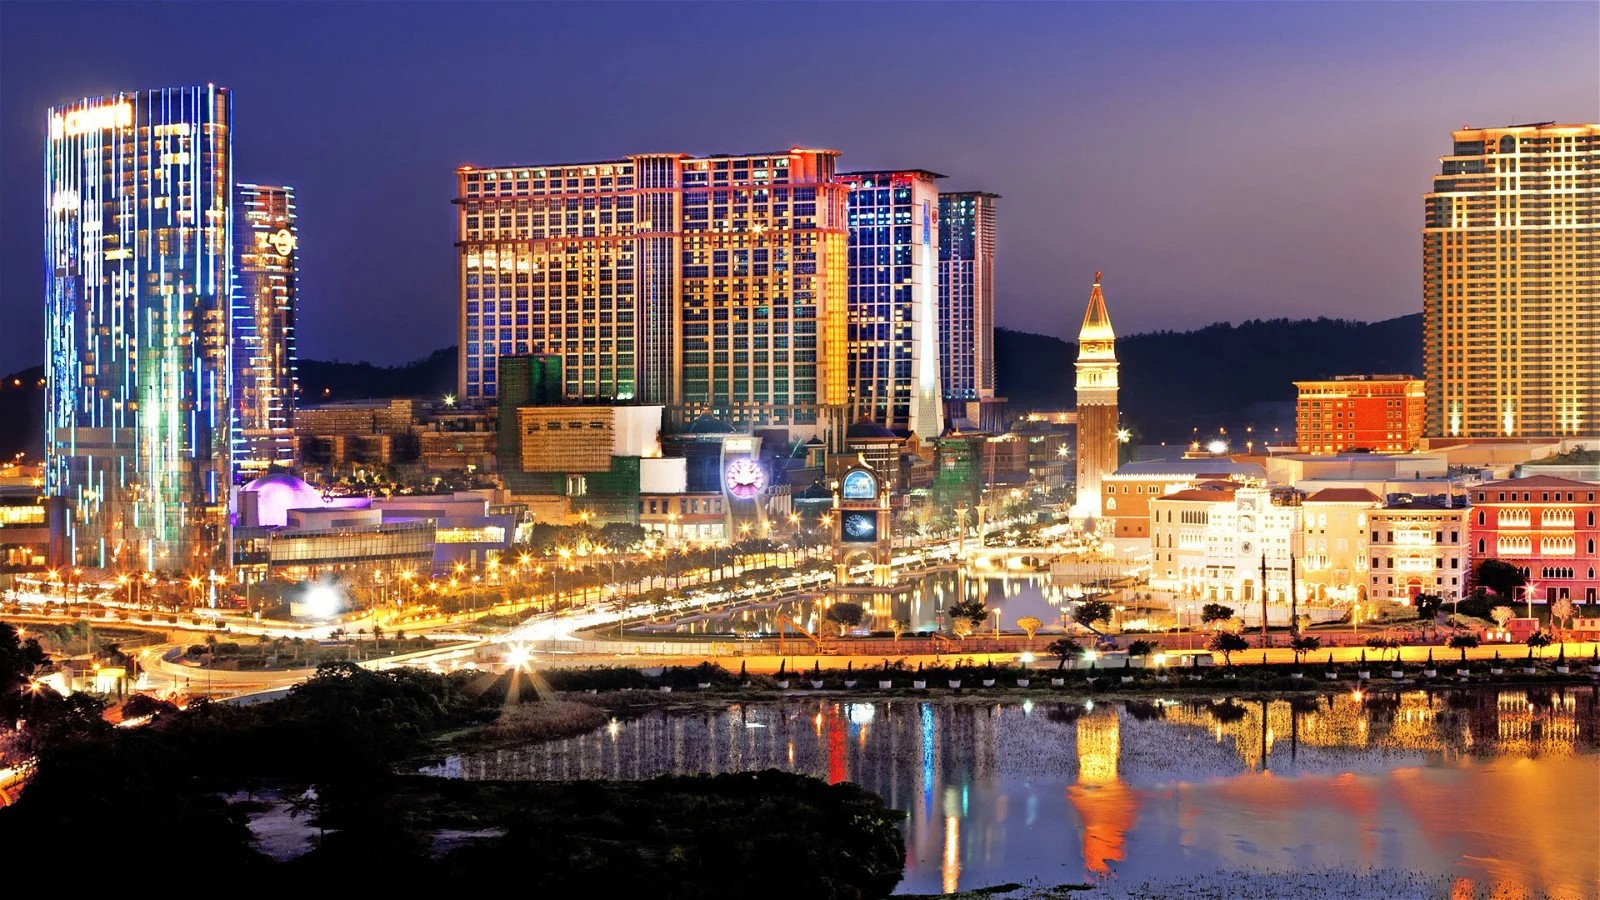 Your Daily Asia Gaming eBrief: Macau November GGR: $374mln, worst year on record